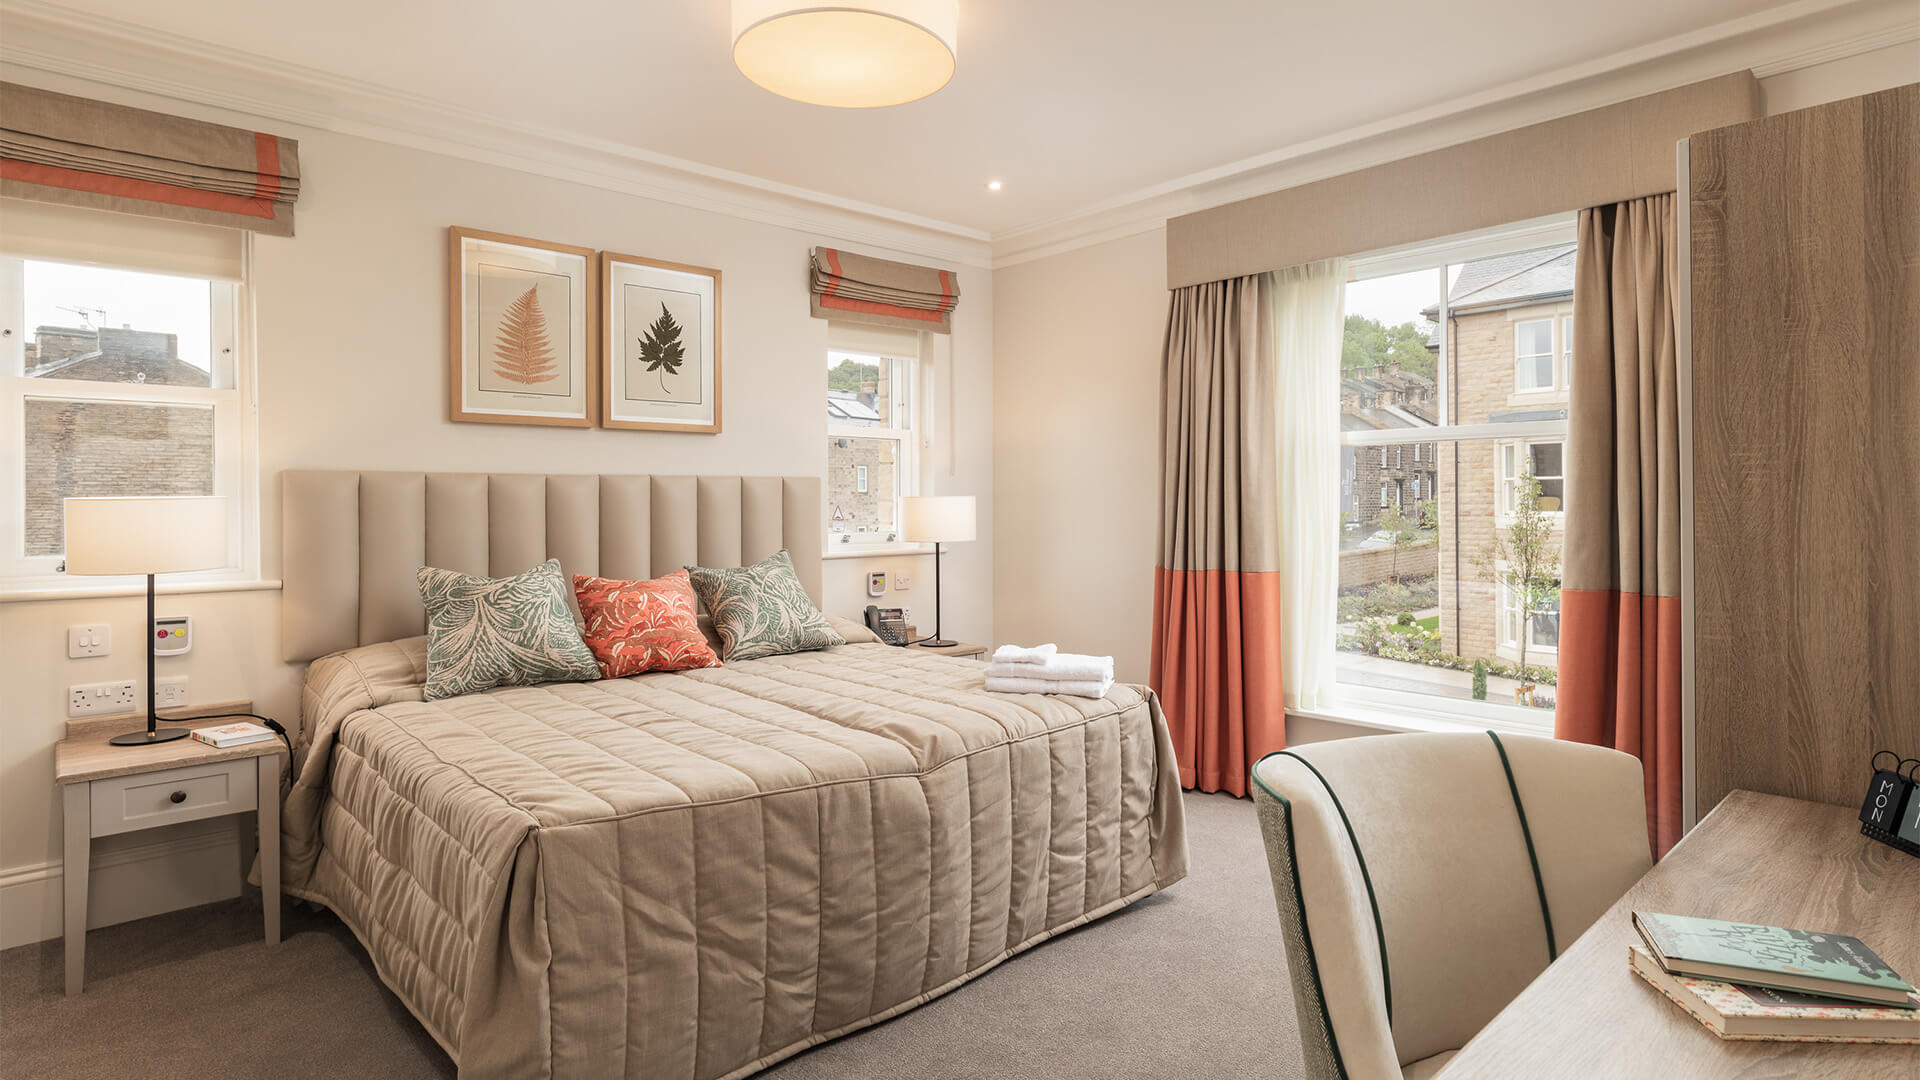 Bedroom with large bed in neutral colours and coral accents. Desk and wardrobes opposite the bed